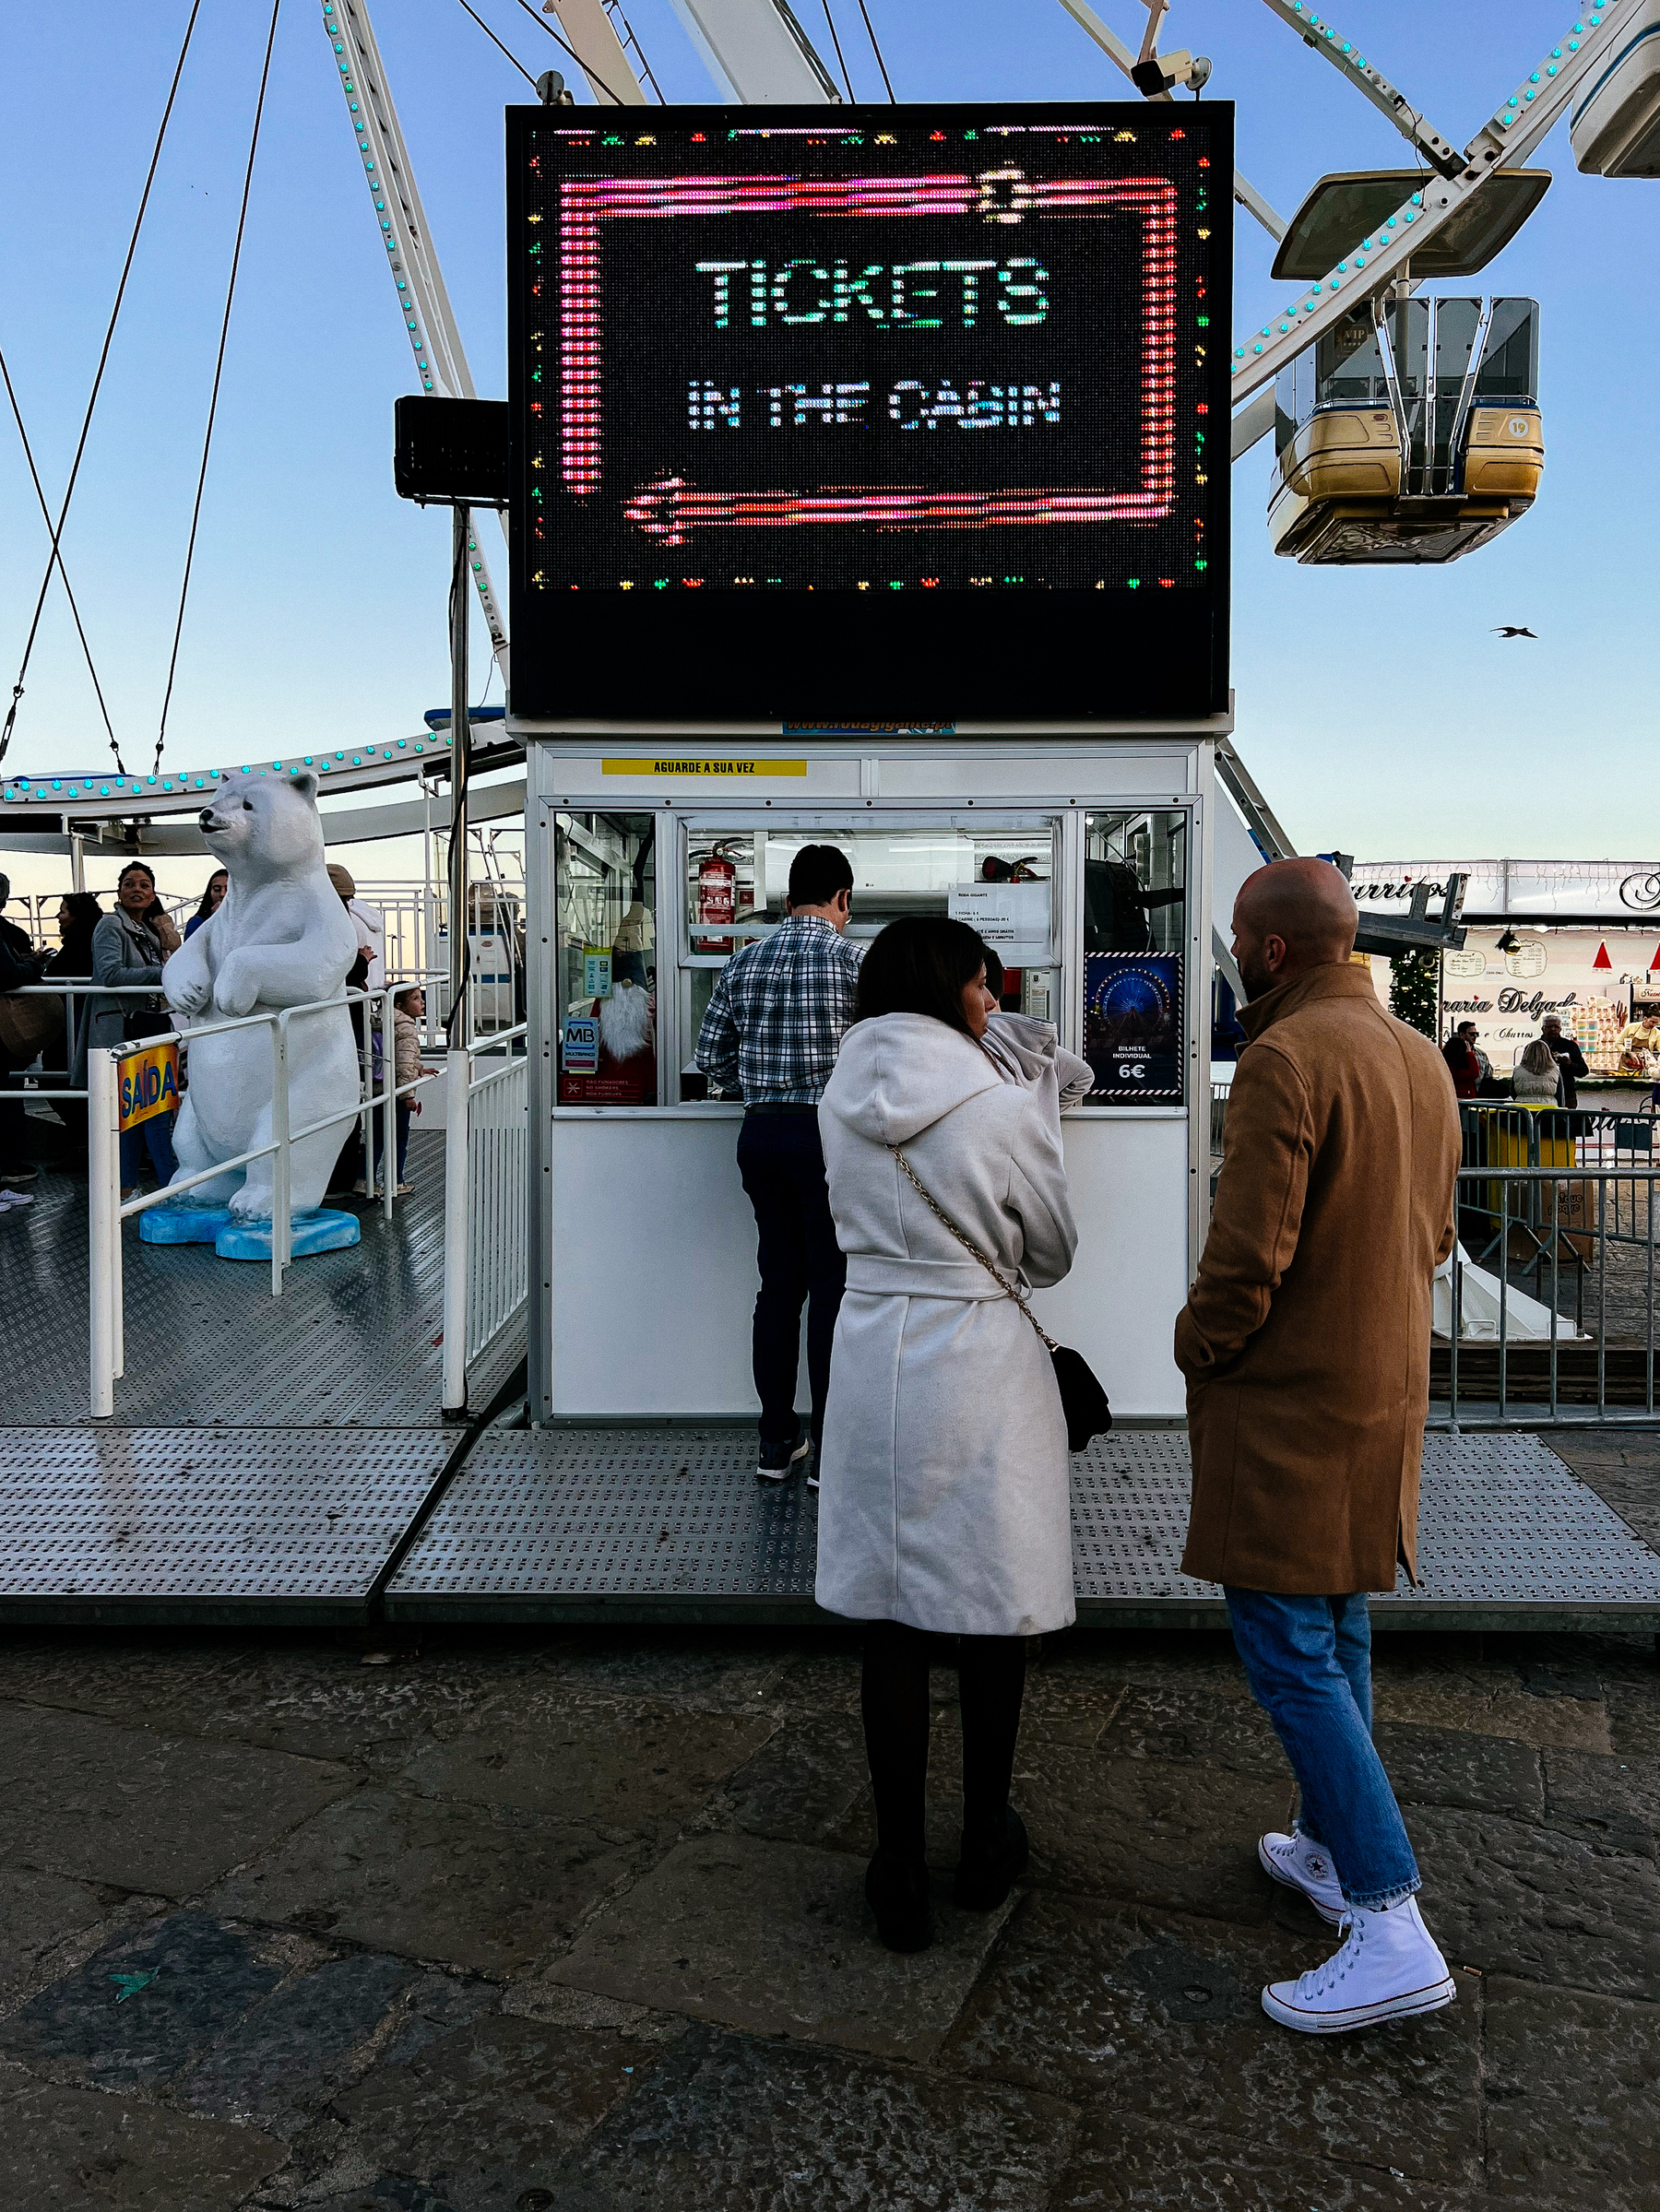 Queue of people at a ticket booth for a Ferris wheel under a bright LED sign that reads &ldquo;TICKETS,&rdquo; with a large Ferris wheel cabin visible in the background and a polar bear statue to the left.